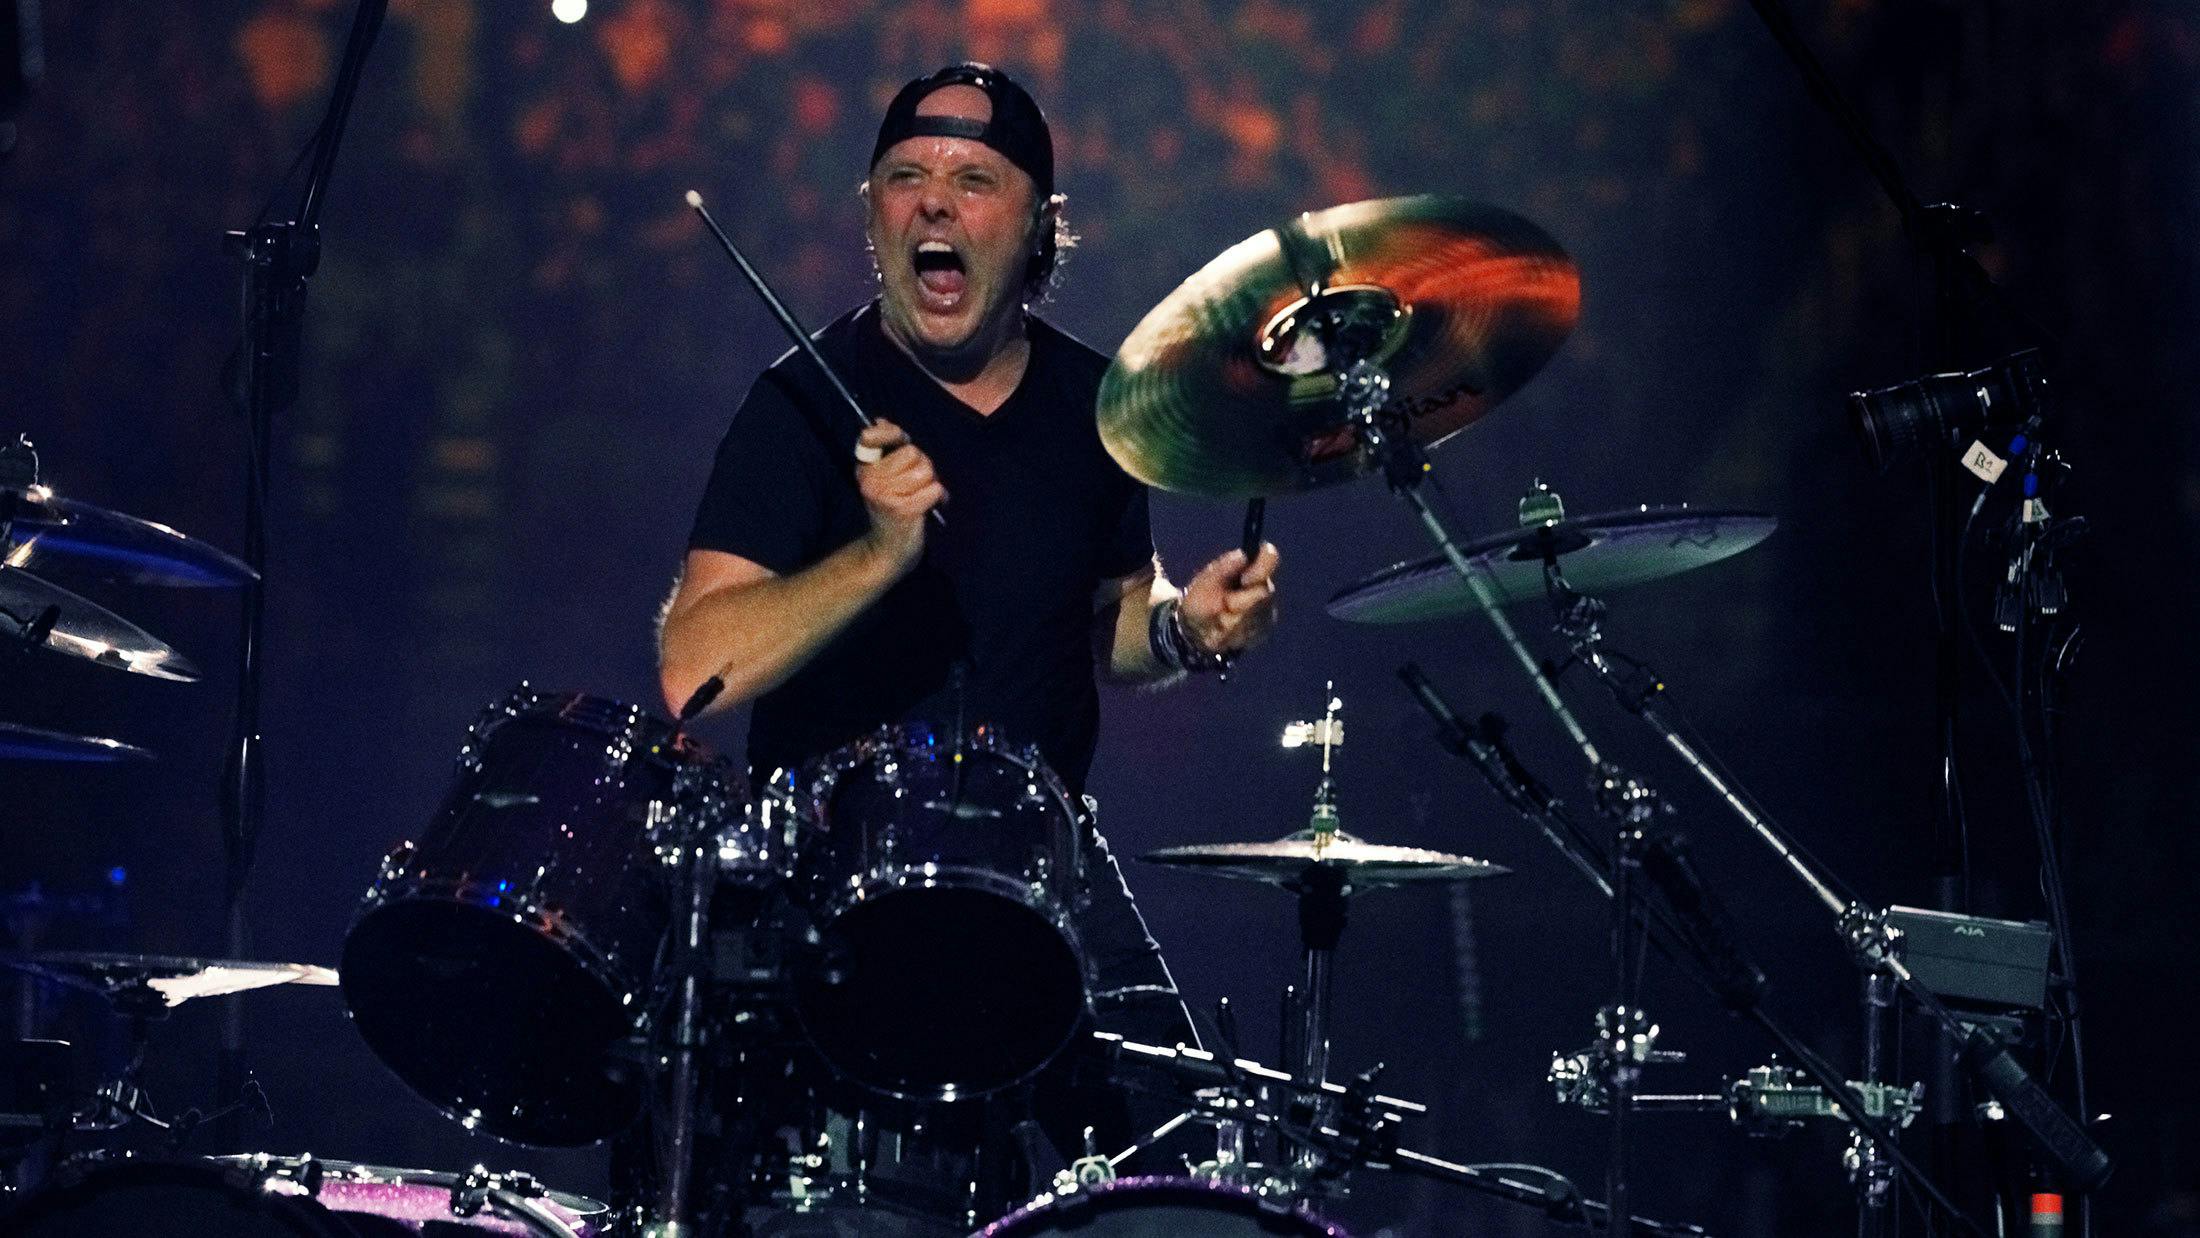 Lars Ulrich On S&M2: “Doing Projects Like This Makes It Fun To Be In Metallica”